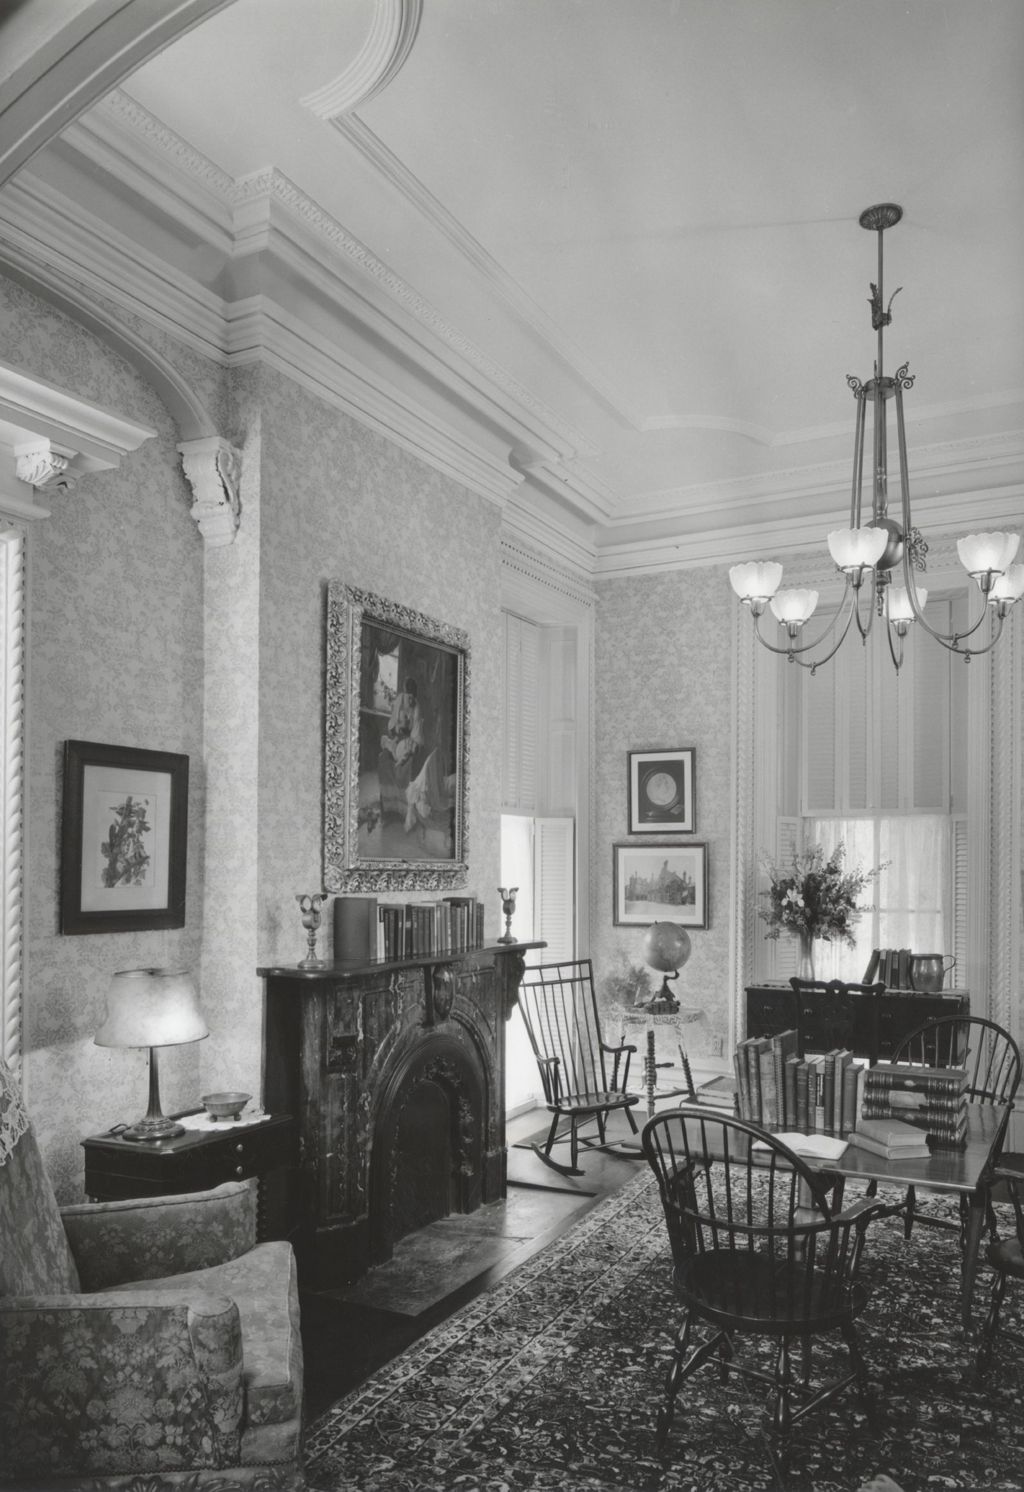 Restored southeast parlor of Hull Mansion just prior to Jane Addams Hull-House Museum opening